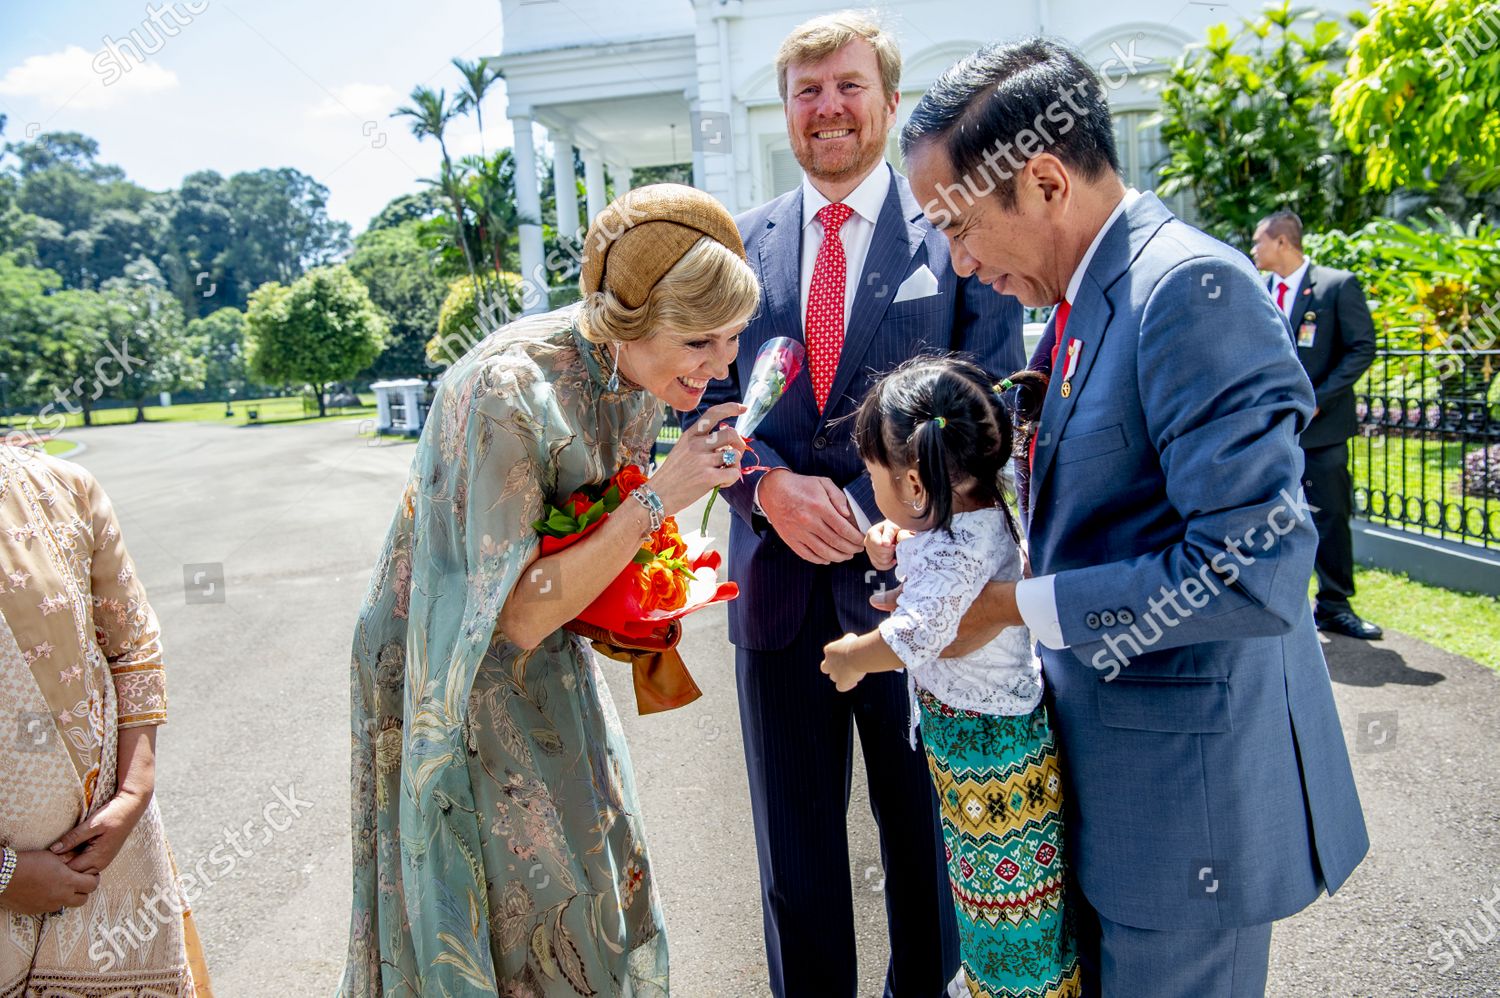 dutch-royals-visit-to-indonesia-shutterstock-editorial-10578533as.jpg